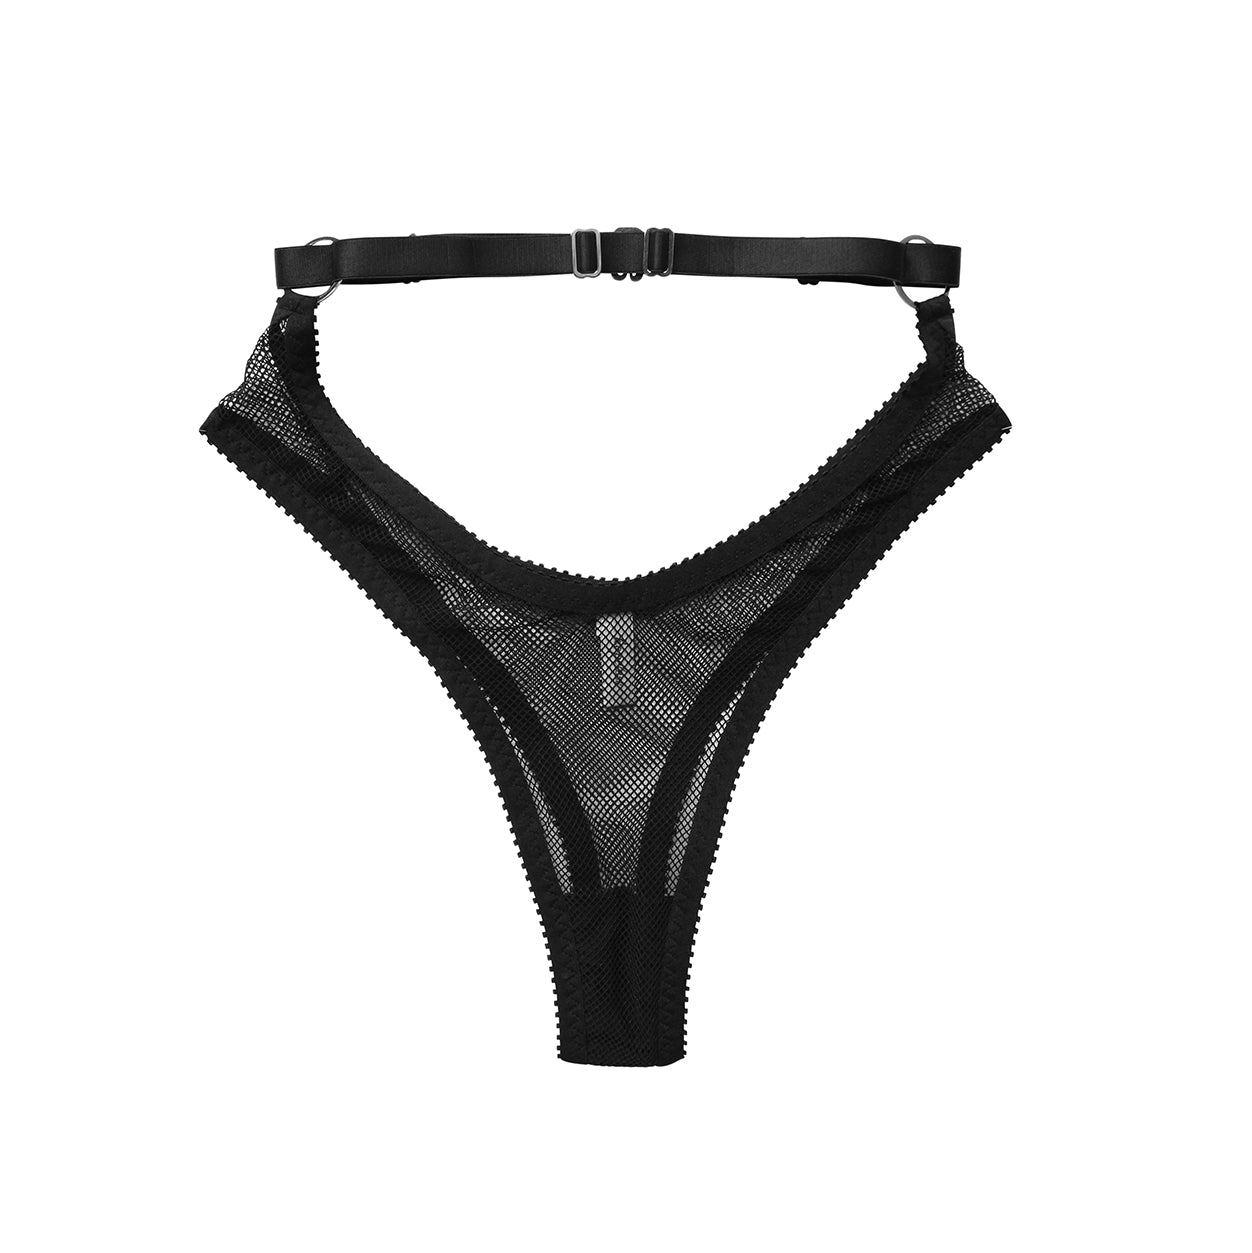 Black Lace High Waisted Thong  Made in Australia by Hopeless Lingerie